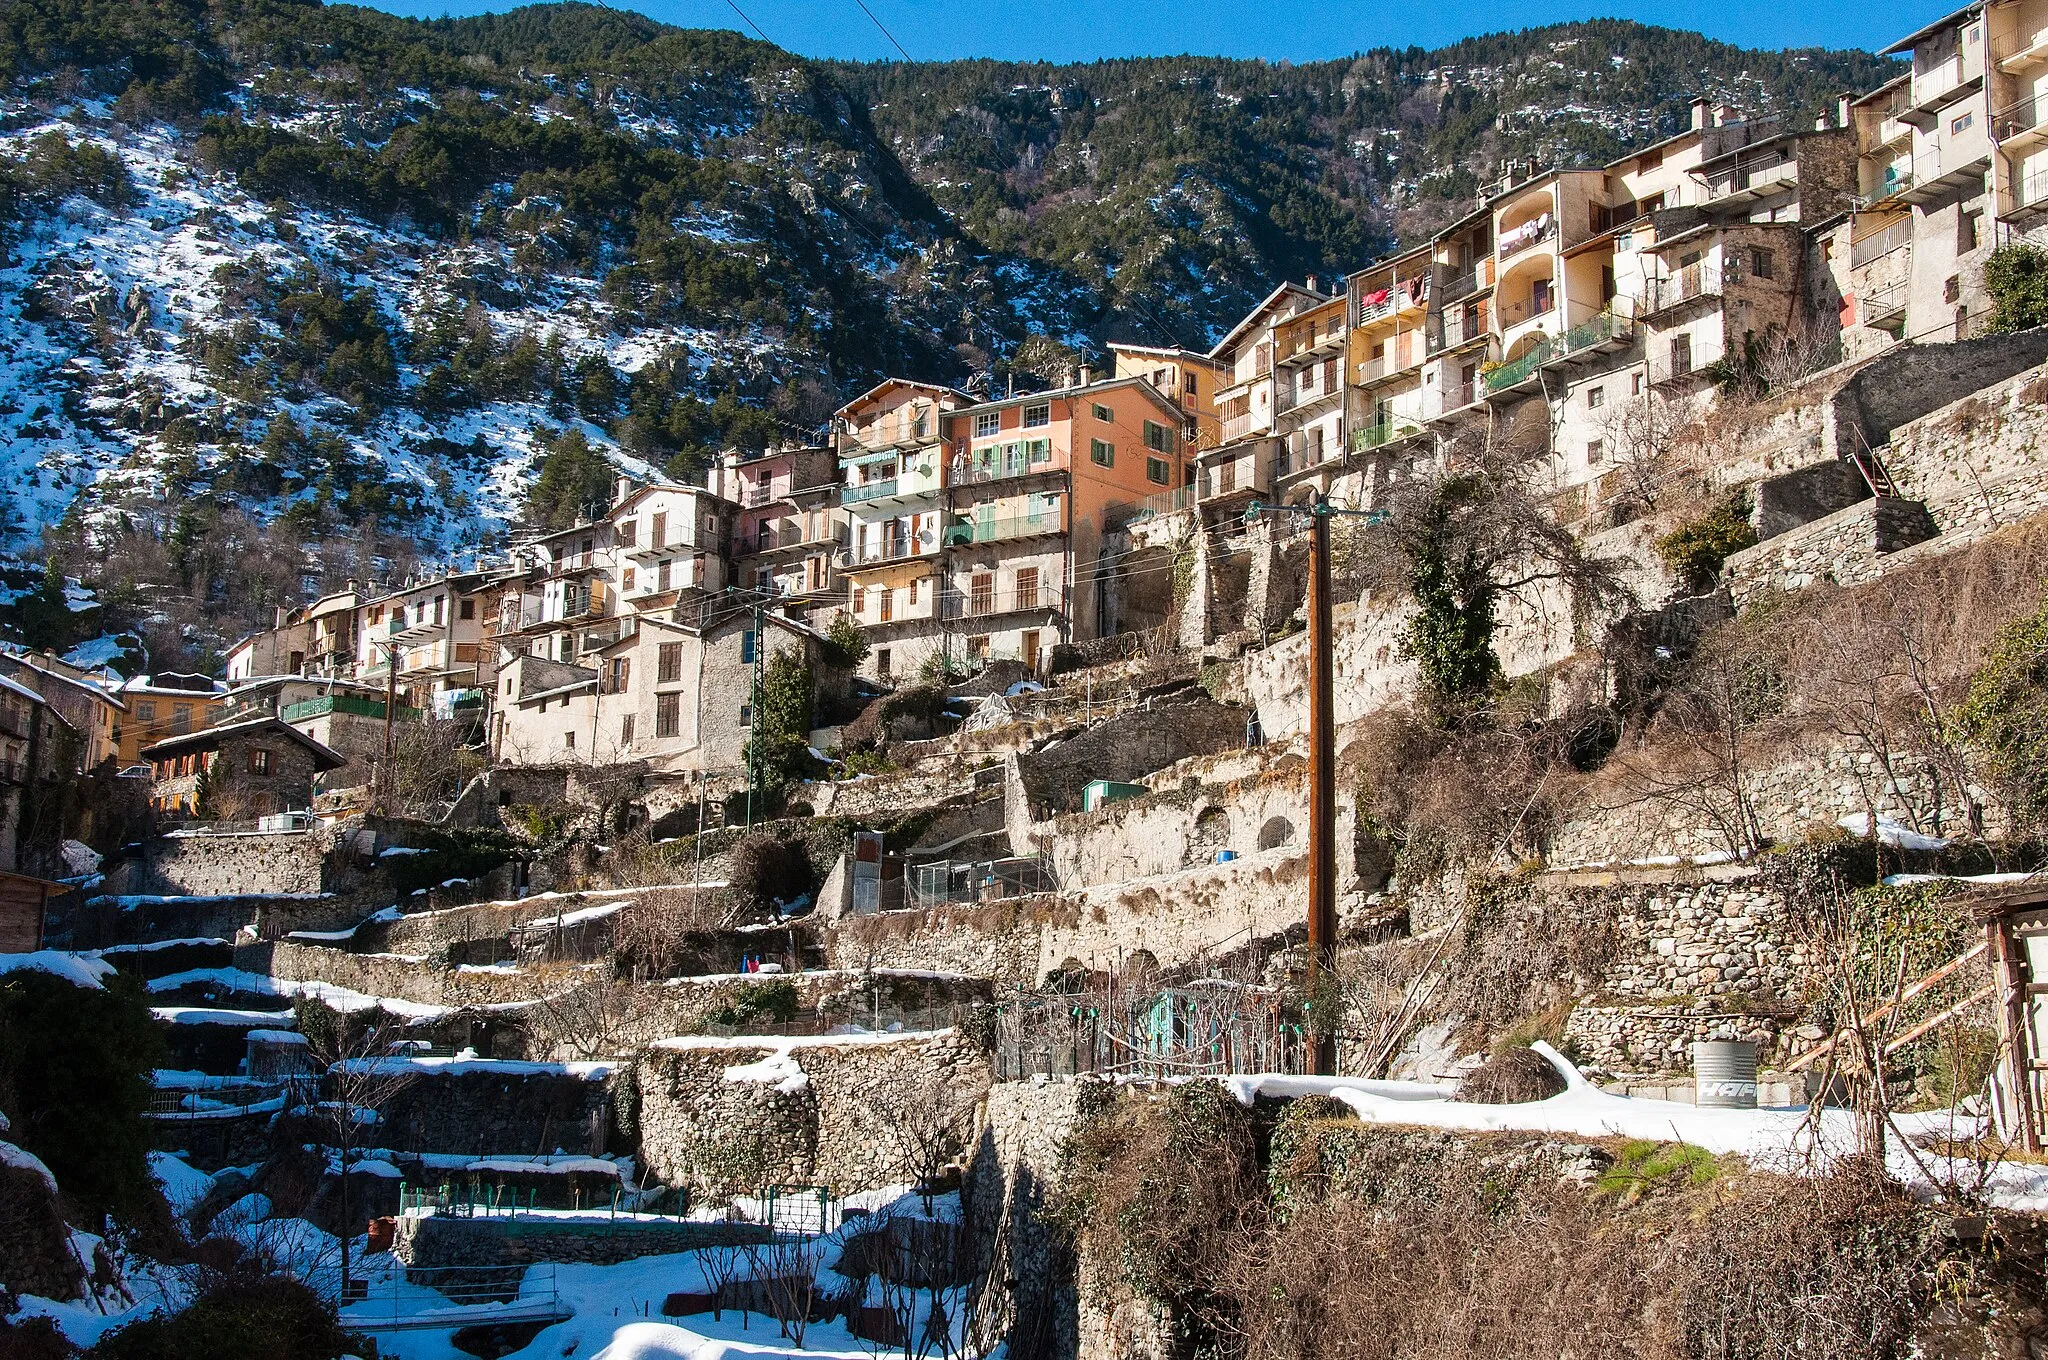 Photo showing: View of the village of Tende, France.  Tende is a small village in the  Provence-Alpes-Côte d'Azur (PACA) province of France near the border with Italy.  The town is located at 800 meters of elevation and is built into the side of a steep hill.  The town has been inhabited since the 7th Century (if not earlier) and is a popular destination for hikers, golfers, and other outdoor sport enthusiasts.  The town has been part of various kingdoms affiliated with both France and Italy over the years and its inhabitants are known as "tendasques" and speak a dialect of French known as "tendasque."